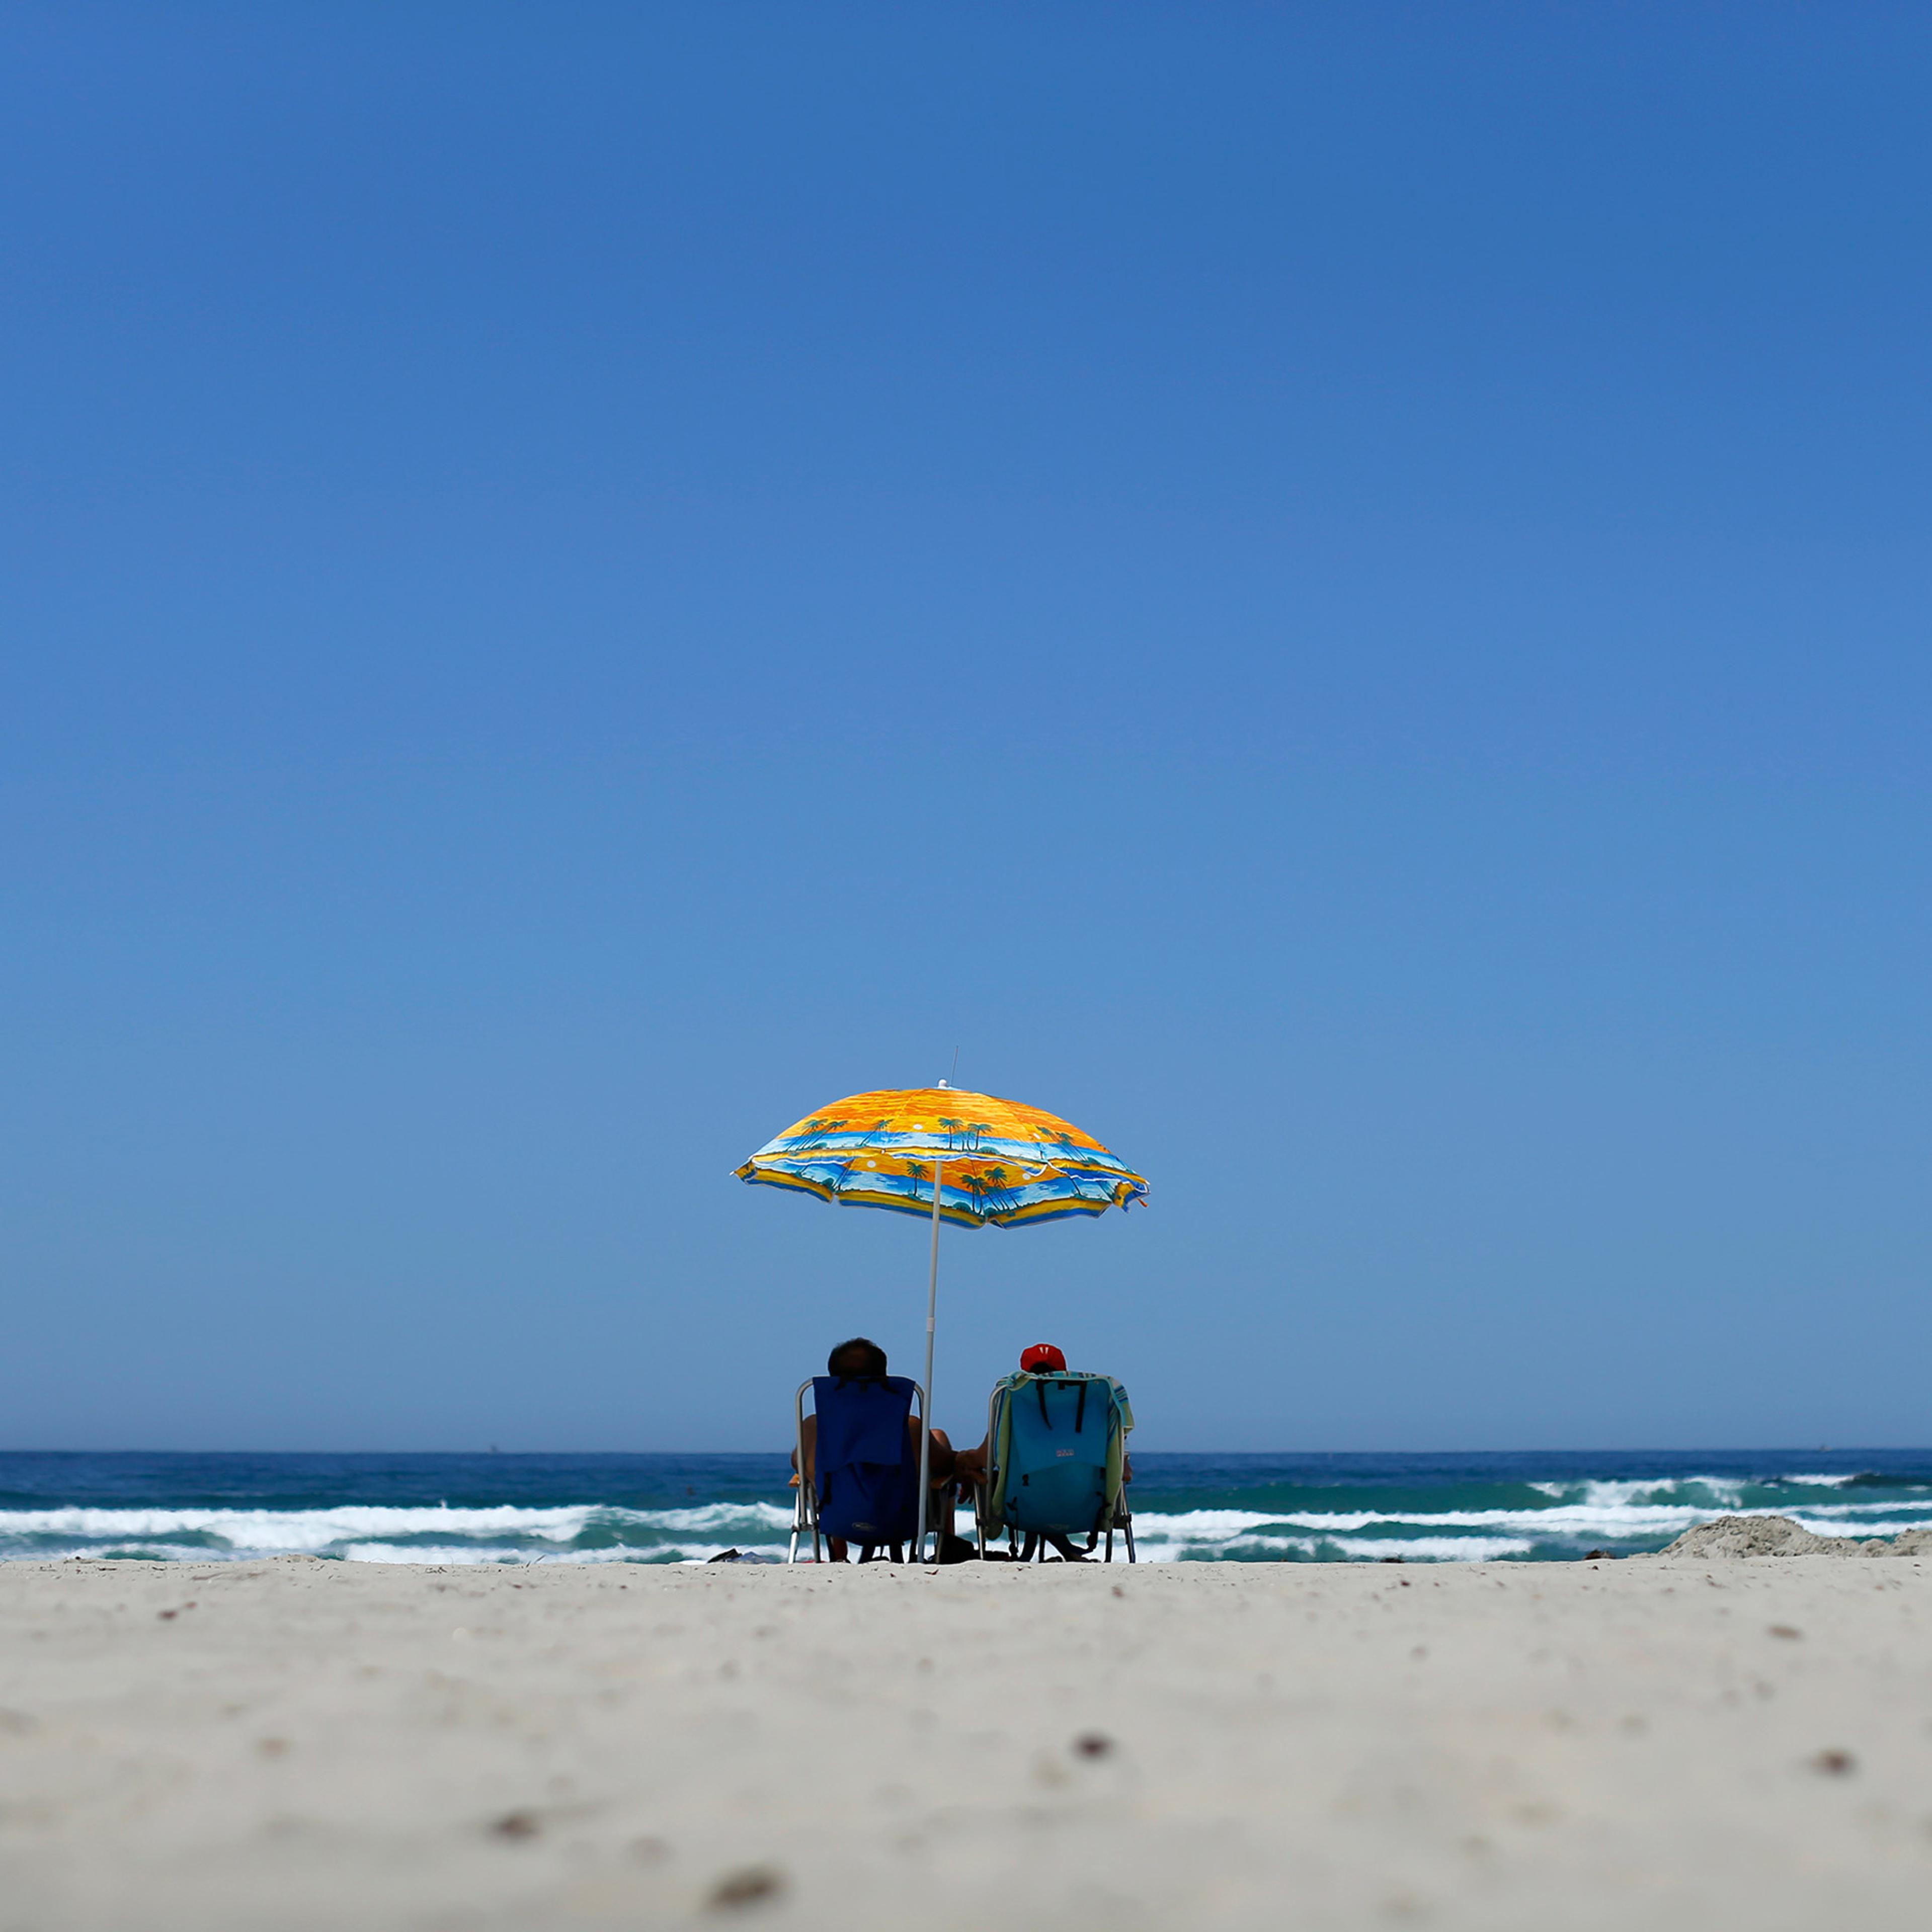 A couple sit in deckchairs beneath a parasol gazing out at the ocean